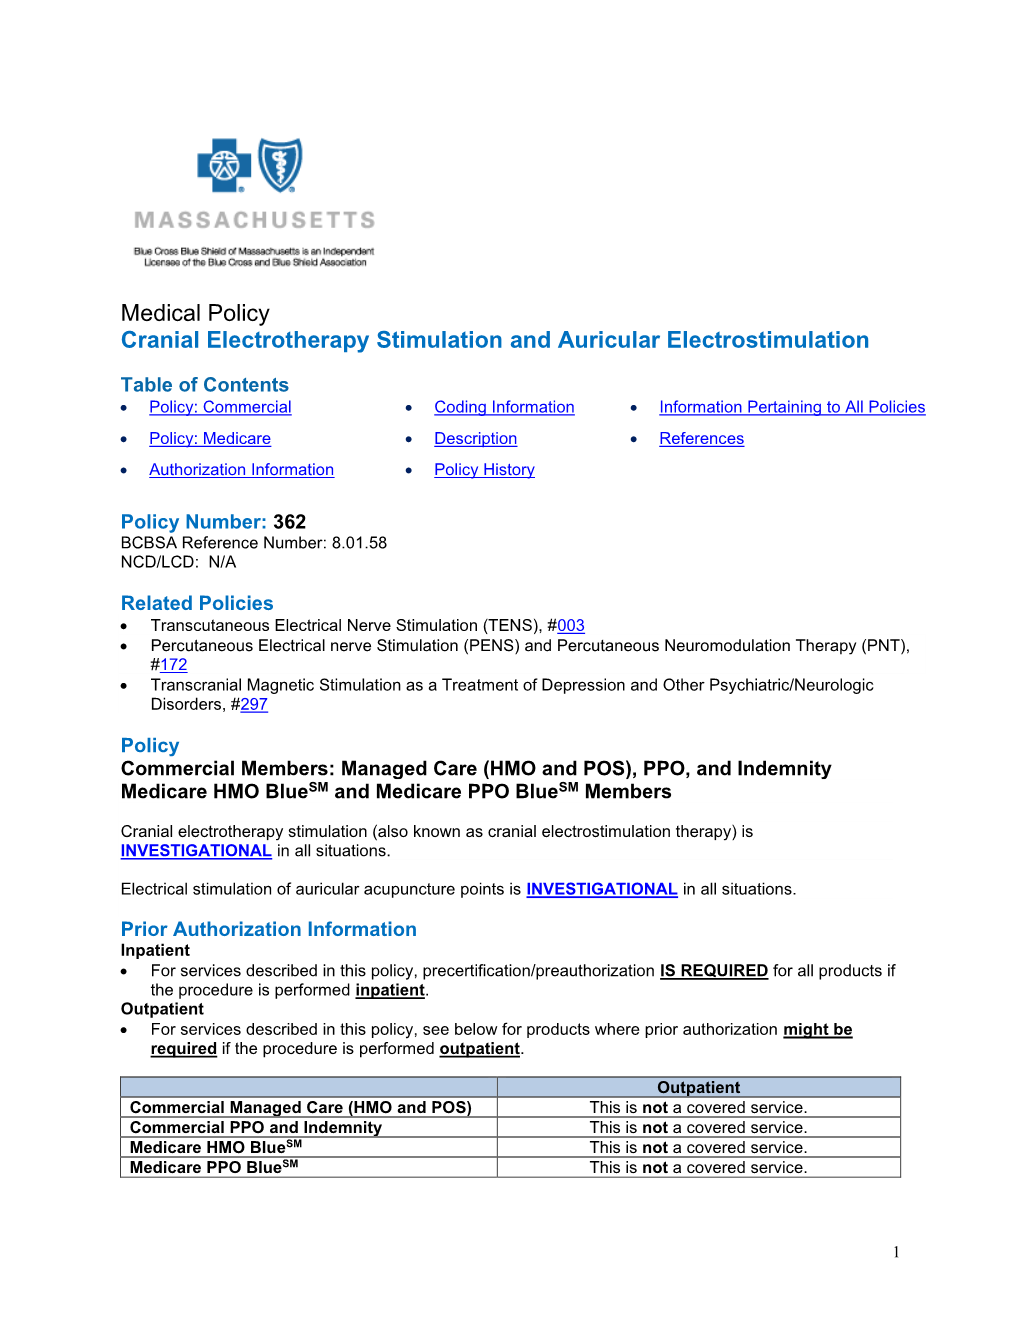 Cranial Electrotherapy Stimulation and Auricular Electrostimulation